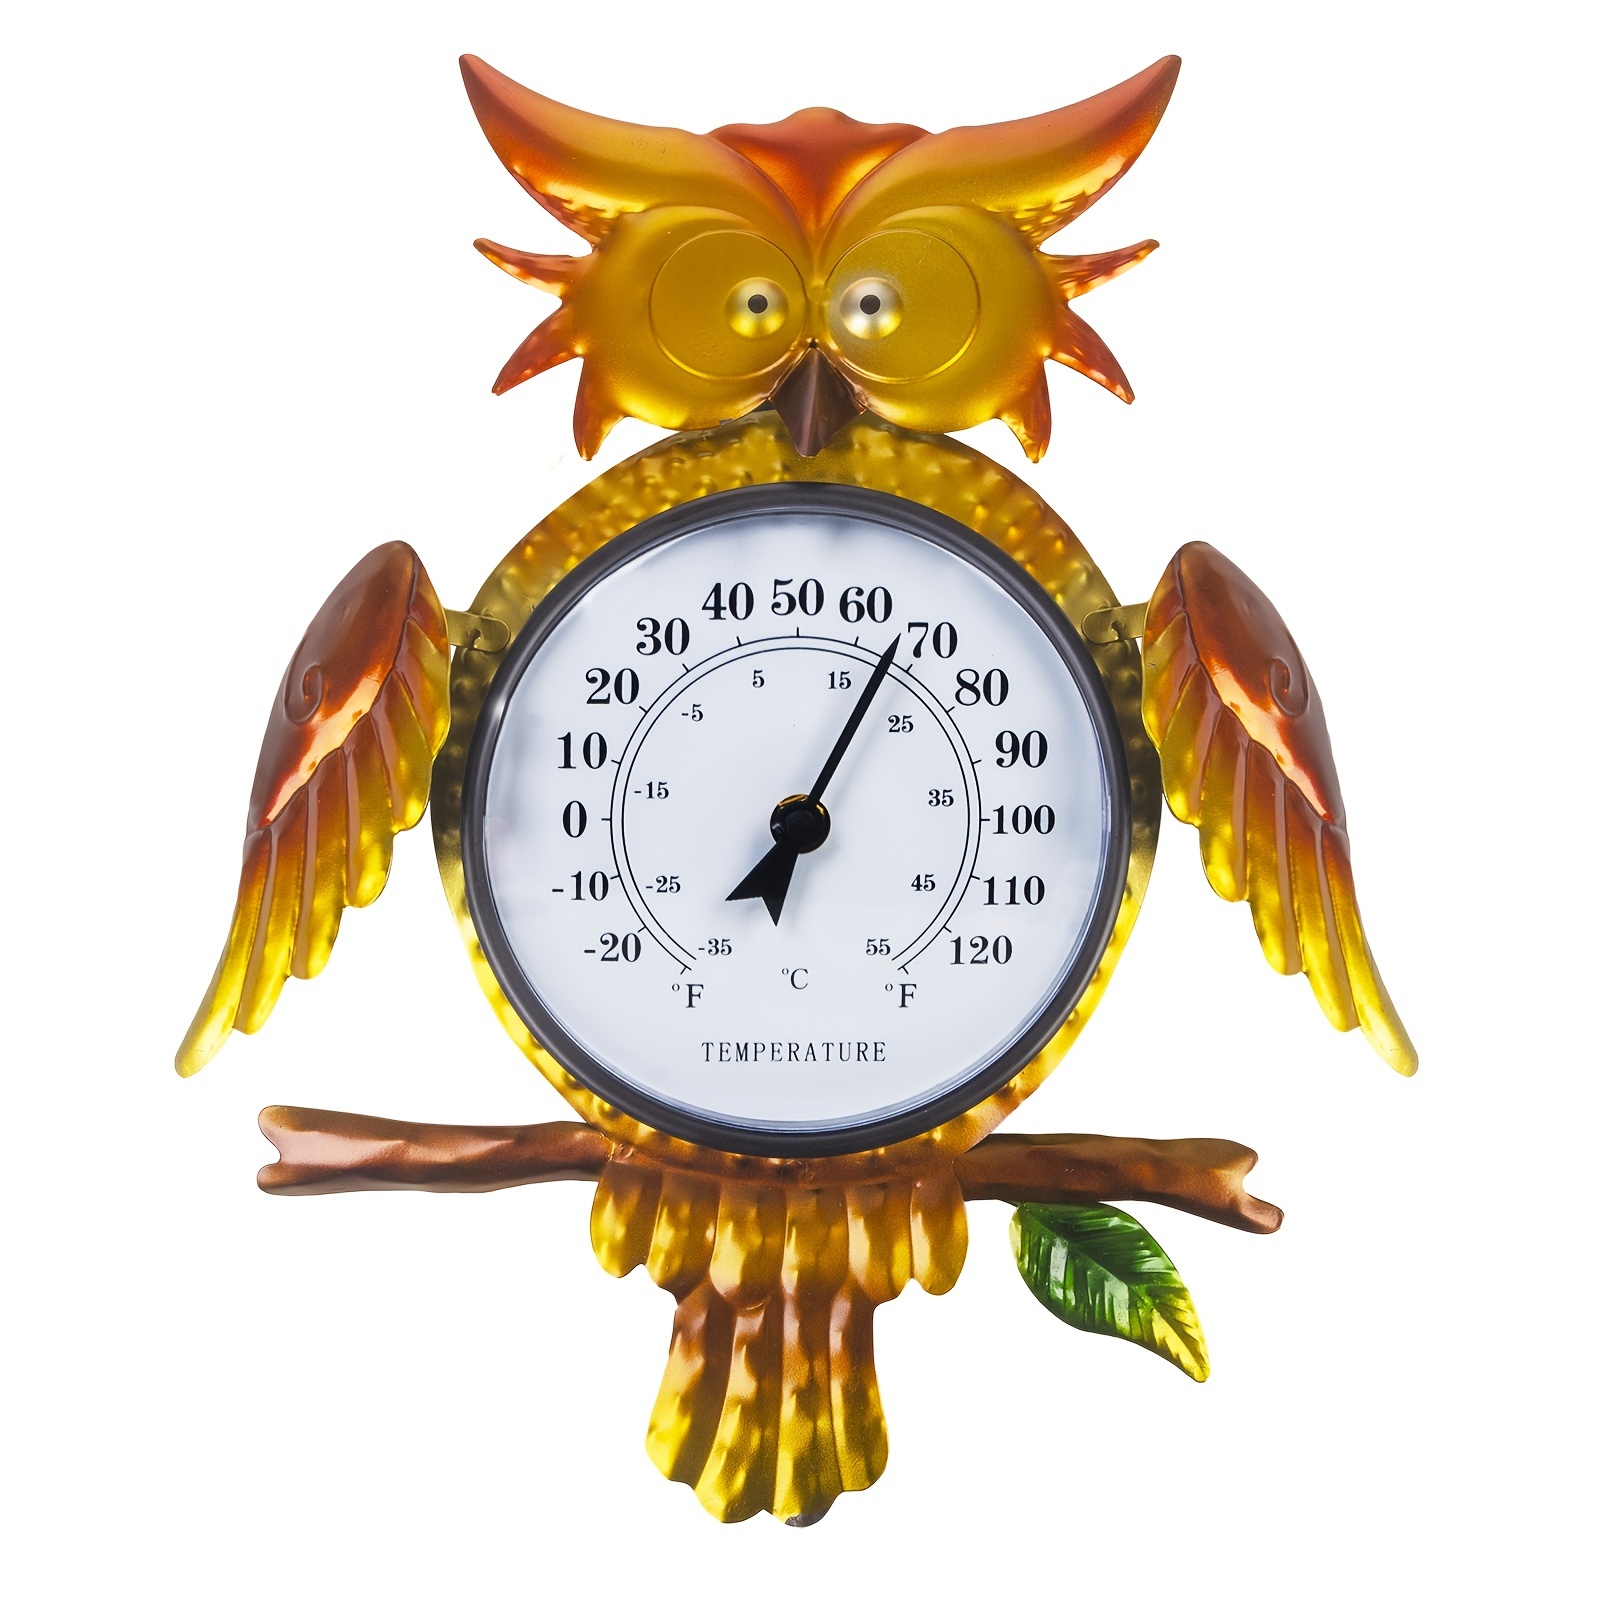 Buy 1pc Outdoor Thermometer - Lowest Price, Free Shipping & Returns